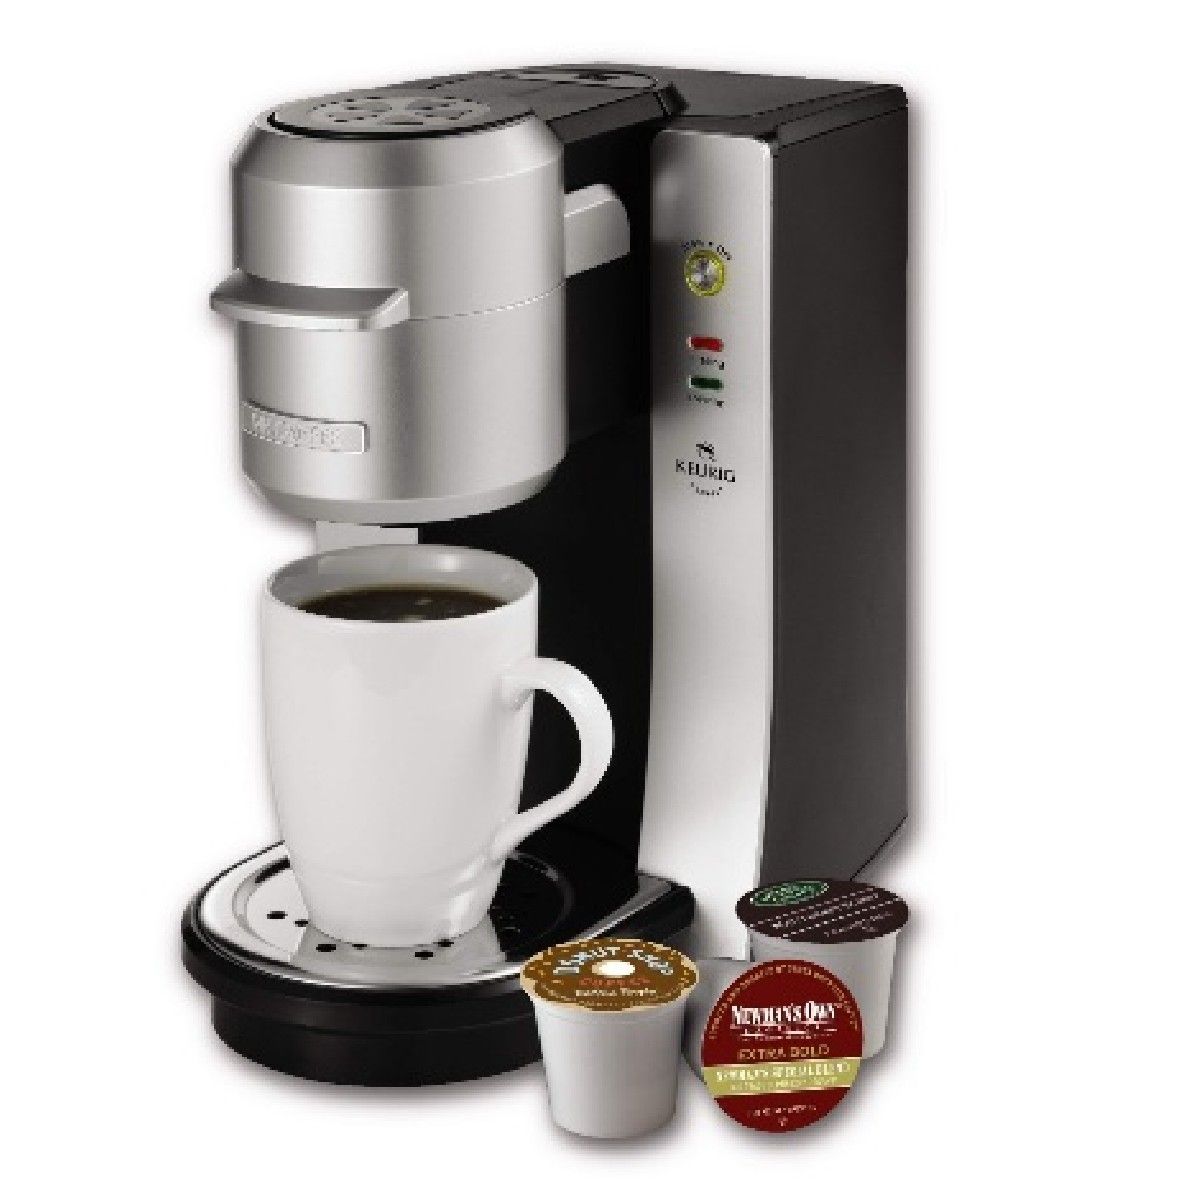 Mr Coffee Single Cup Brewing System Coffeemaker with Keurig Technology